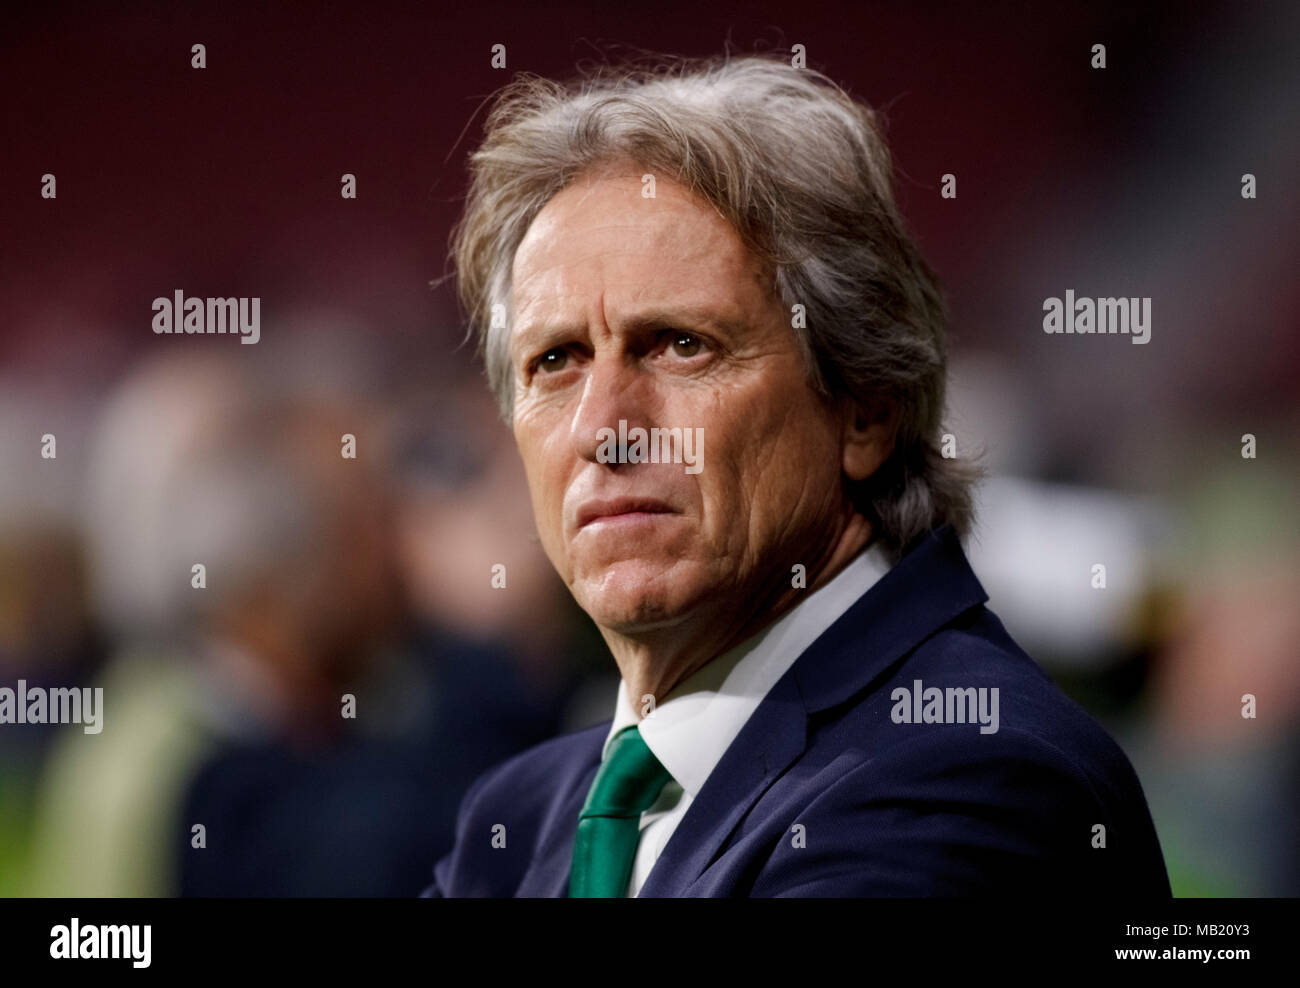 Jorge Jesus of Sporting Portugal during the UEFA Europe League 2017/18 quarter finals, first leg match between Atletico de Madrid and Sporting Portugal, at Wanda Metropolitano Stadium in Madrid on April 5, 2018. (Photo by Guille Martinez/Cordon Press) Stock Photo